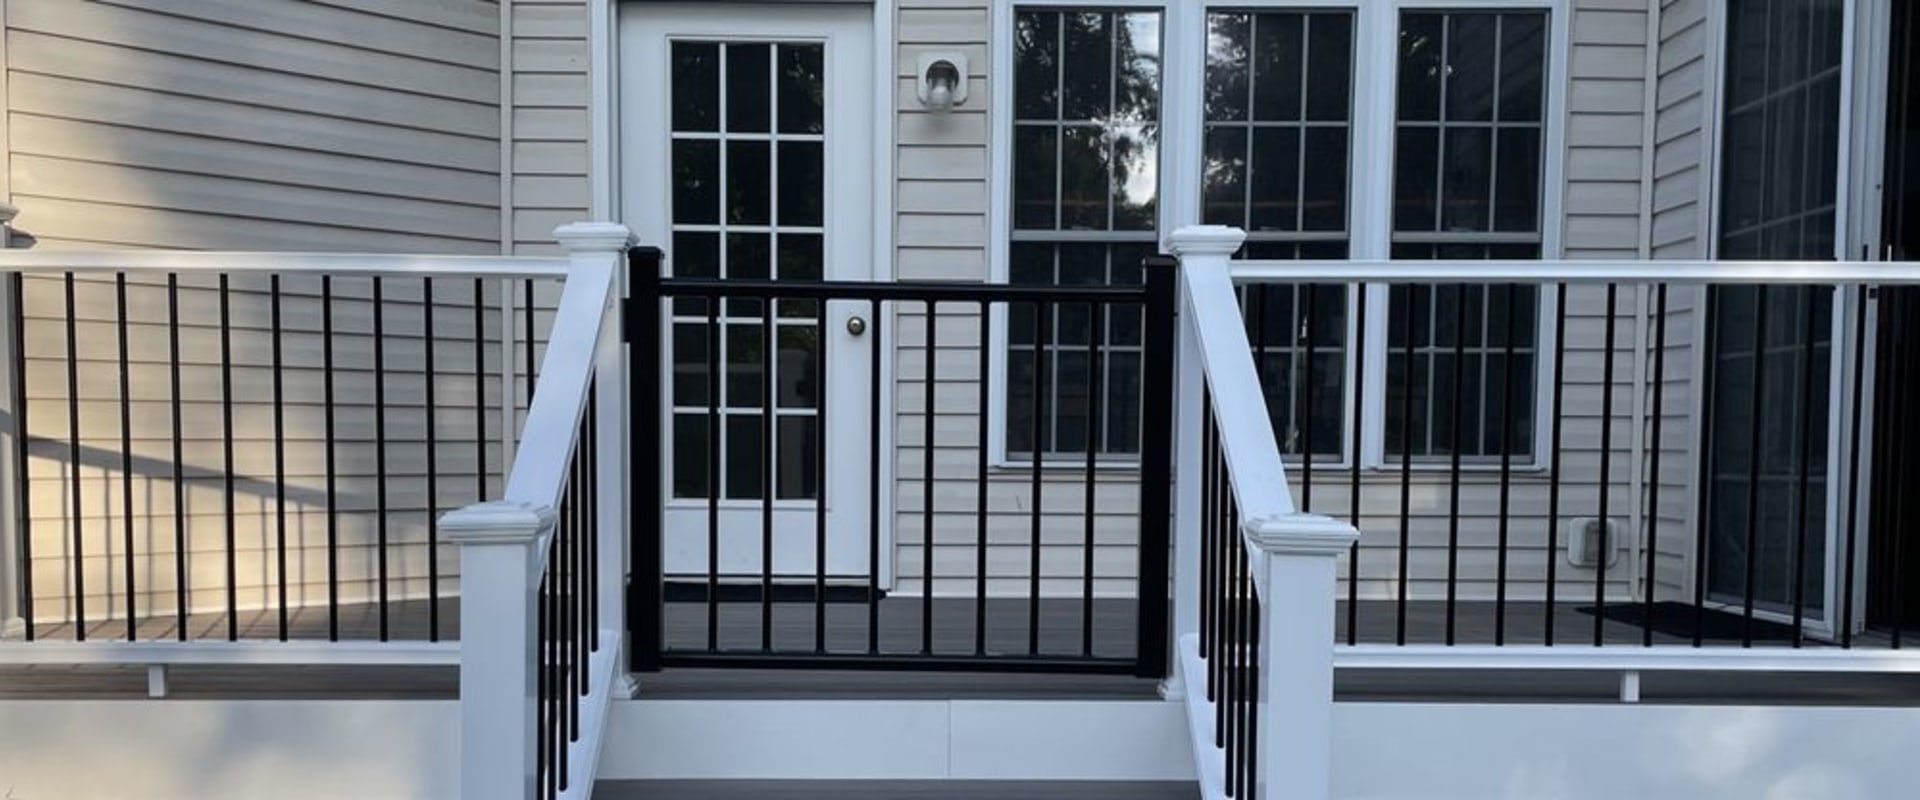 Screened Porches: Adding Elegance And Functionality With Paving Contractor Precision In Northern Virginia